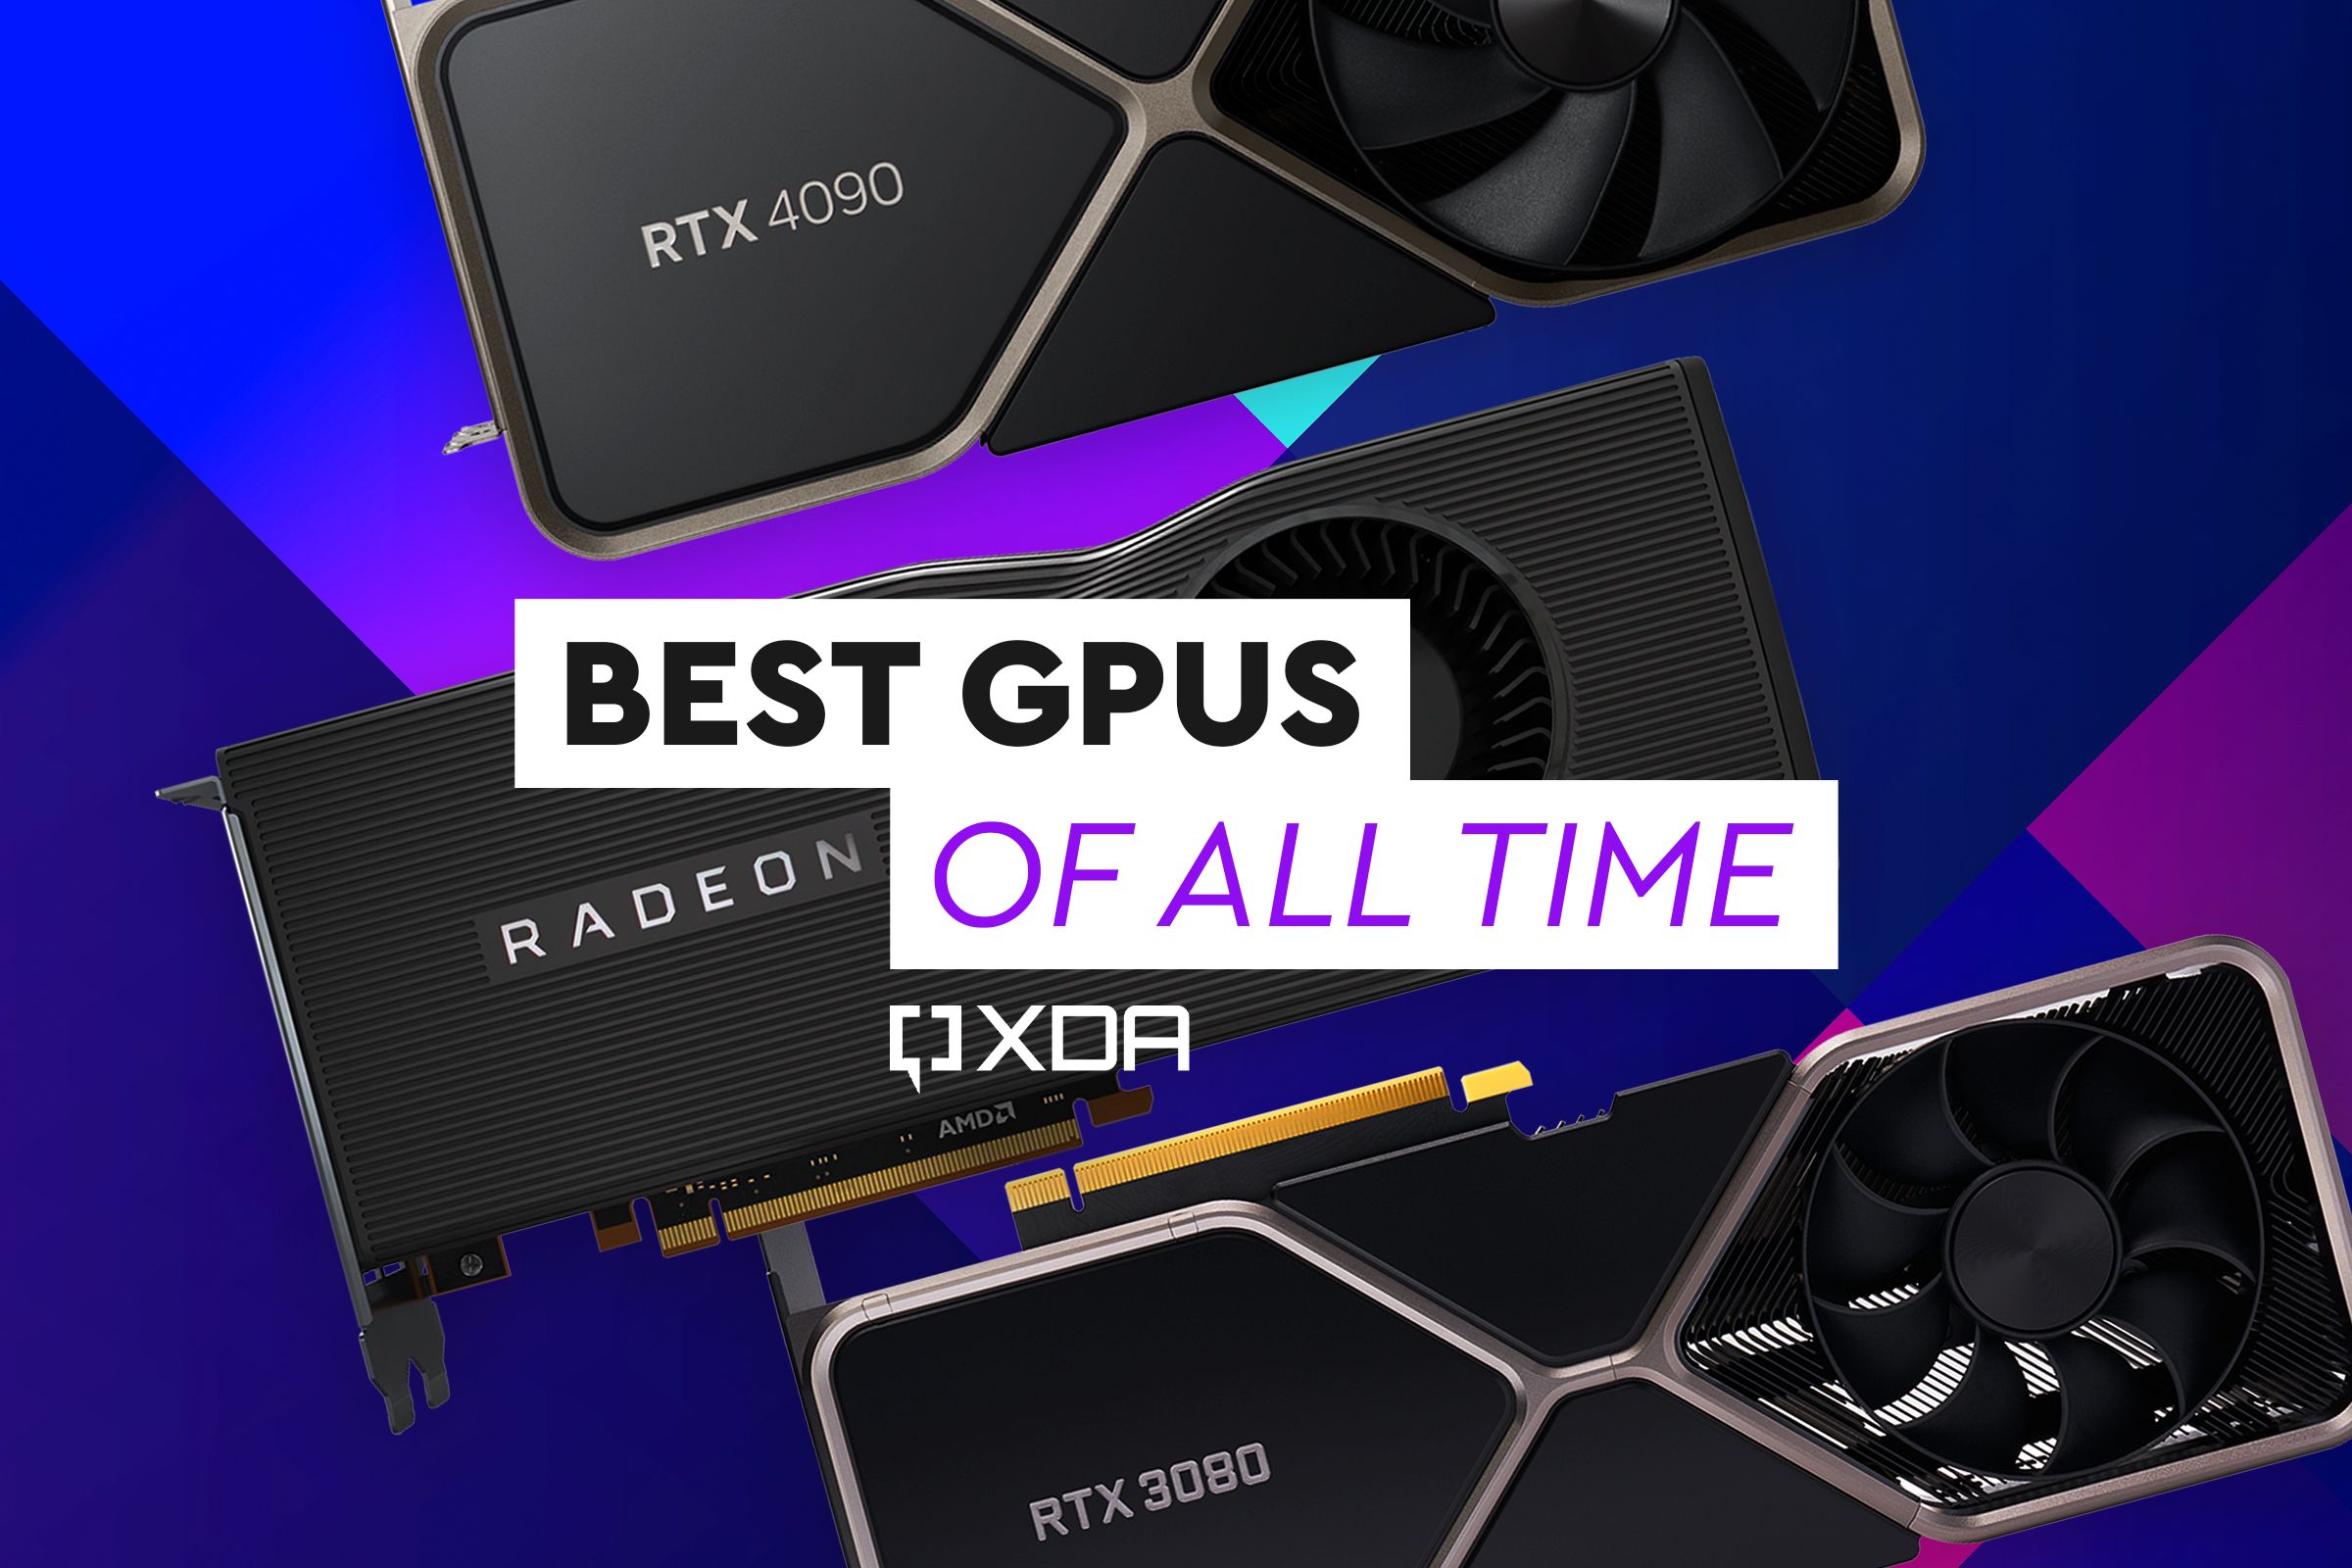 7 top GPUs of all time